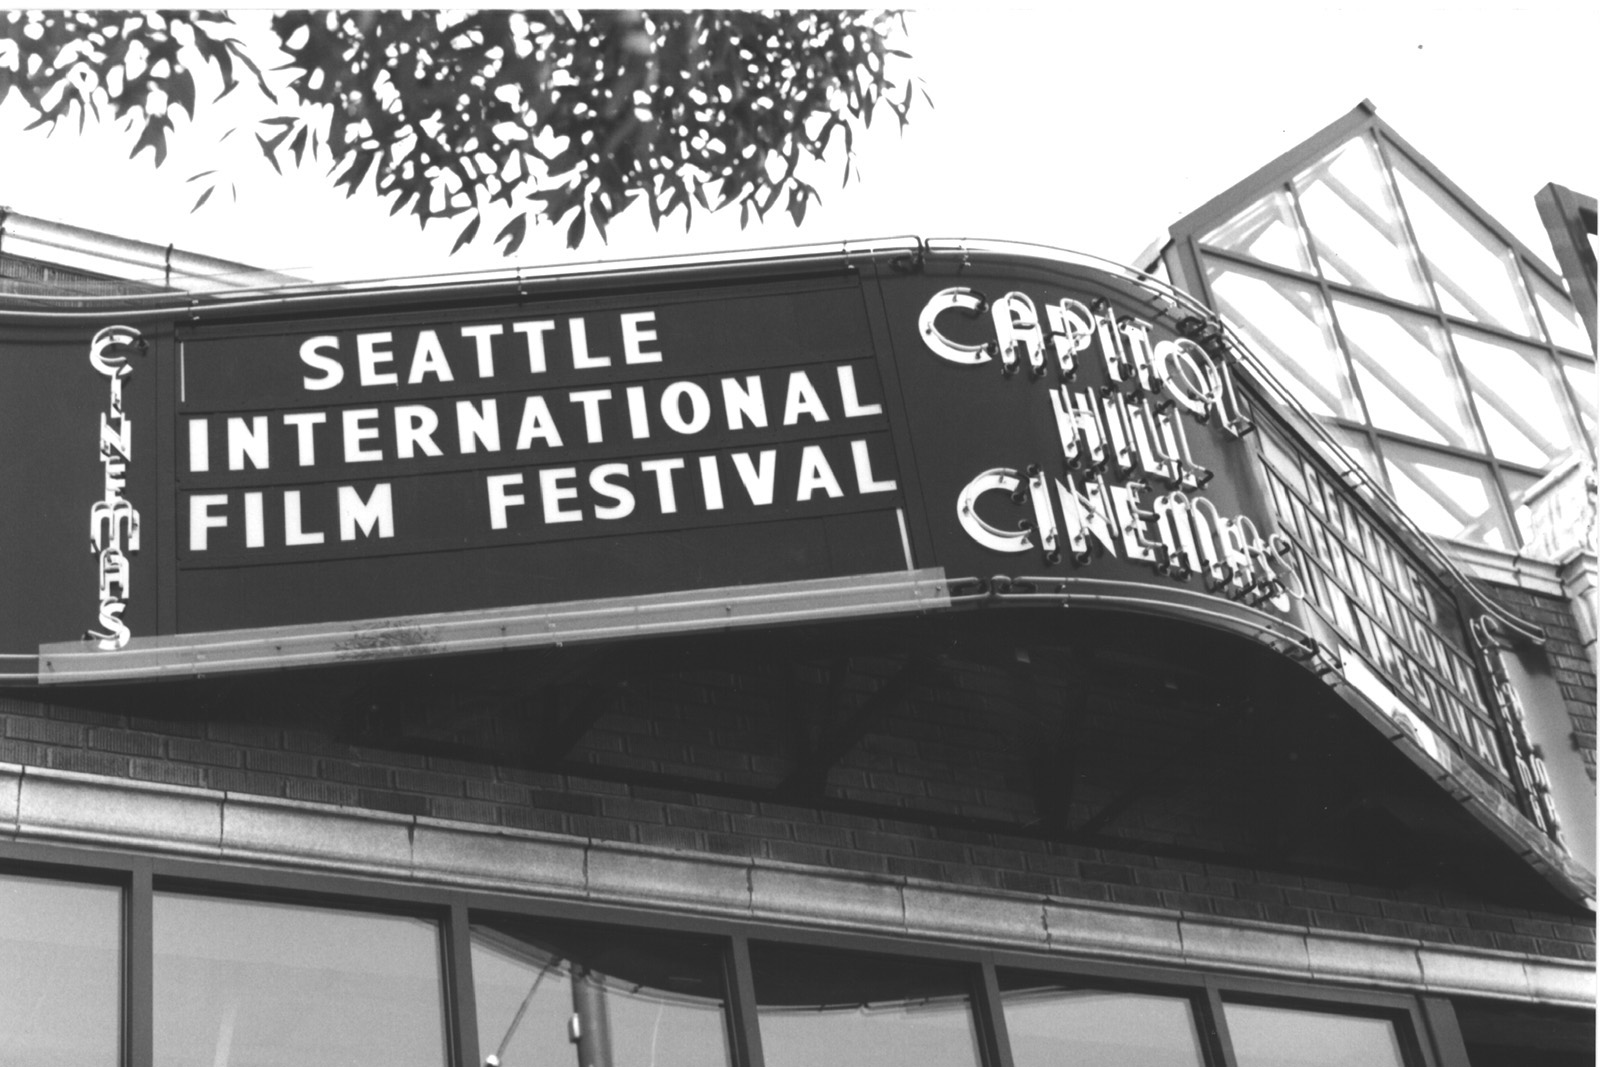 Capitol Hill Cinemas, a new venue for SIFF in 1989, celebrates the 15th Seattle International Film Festival